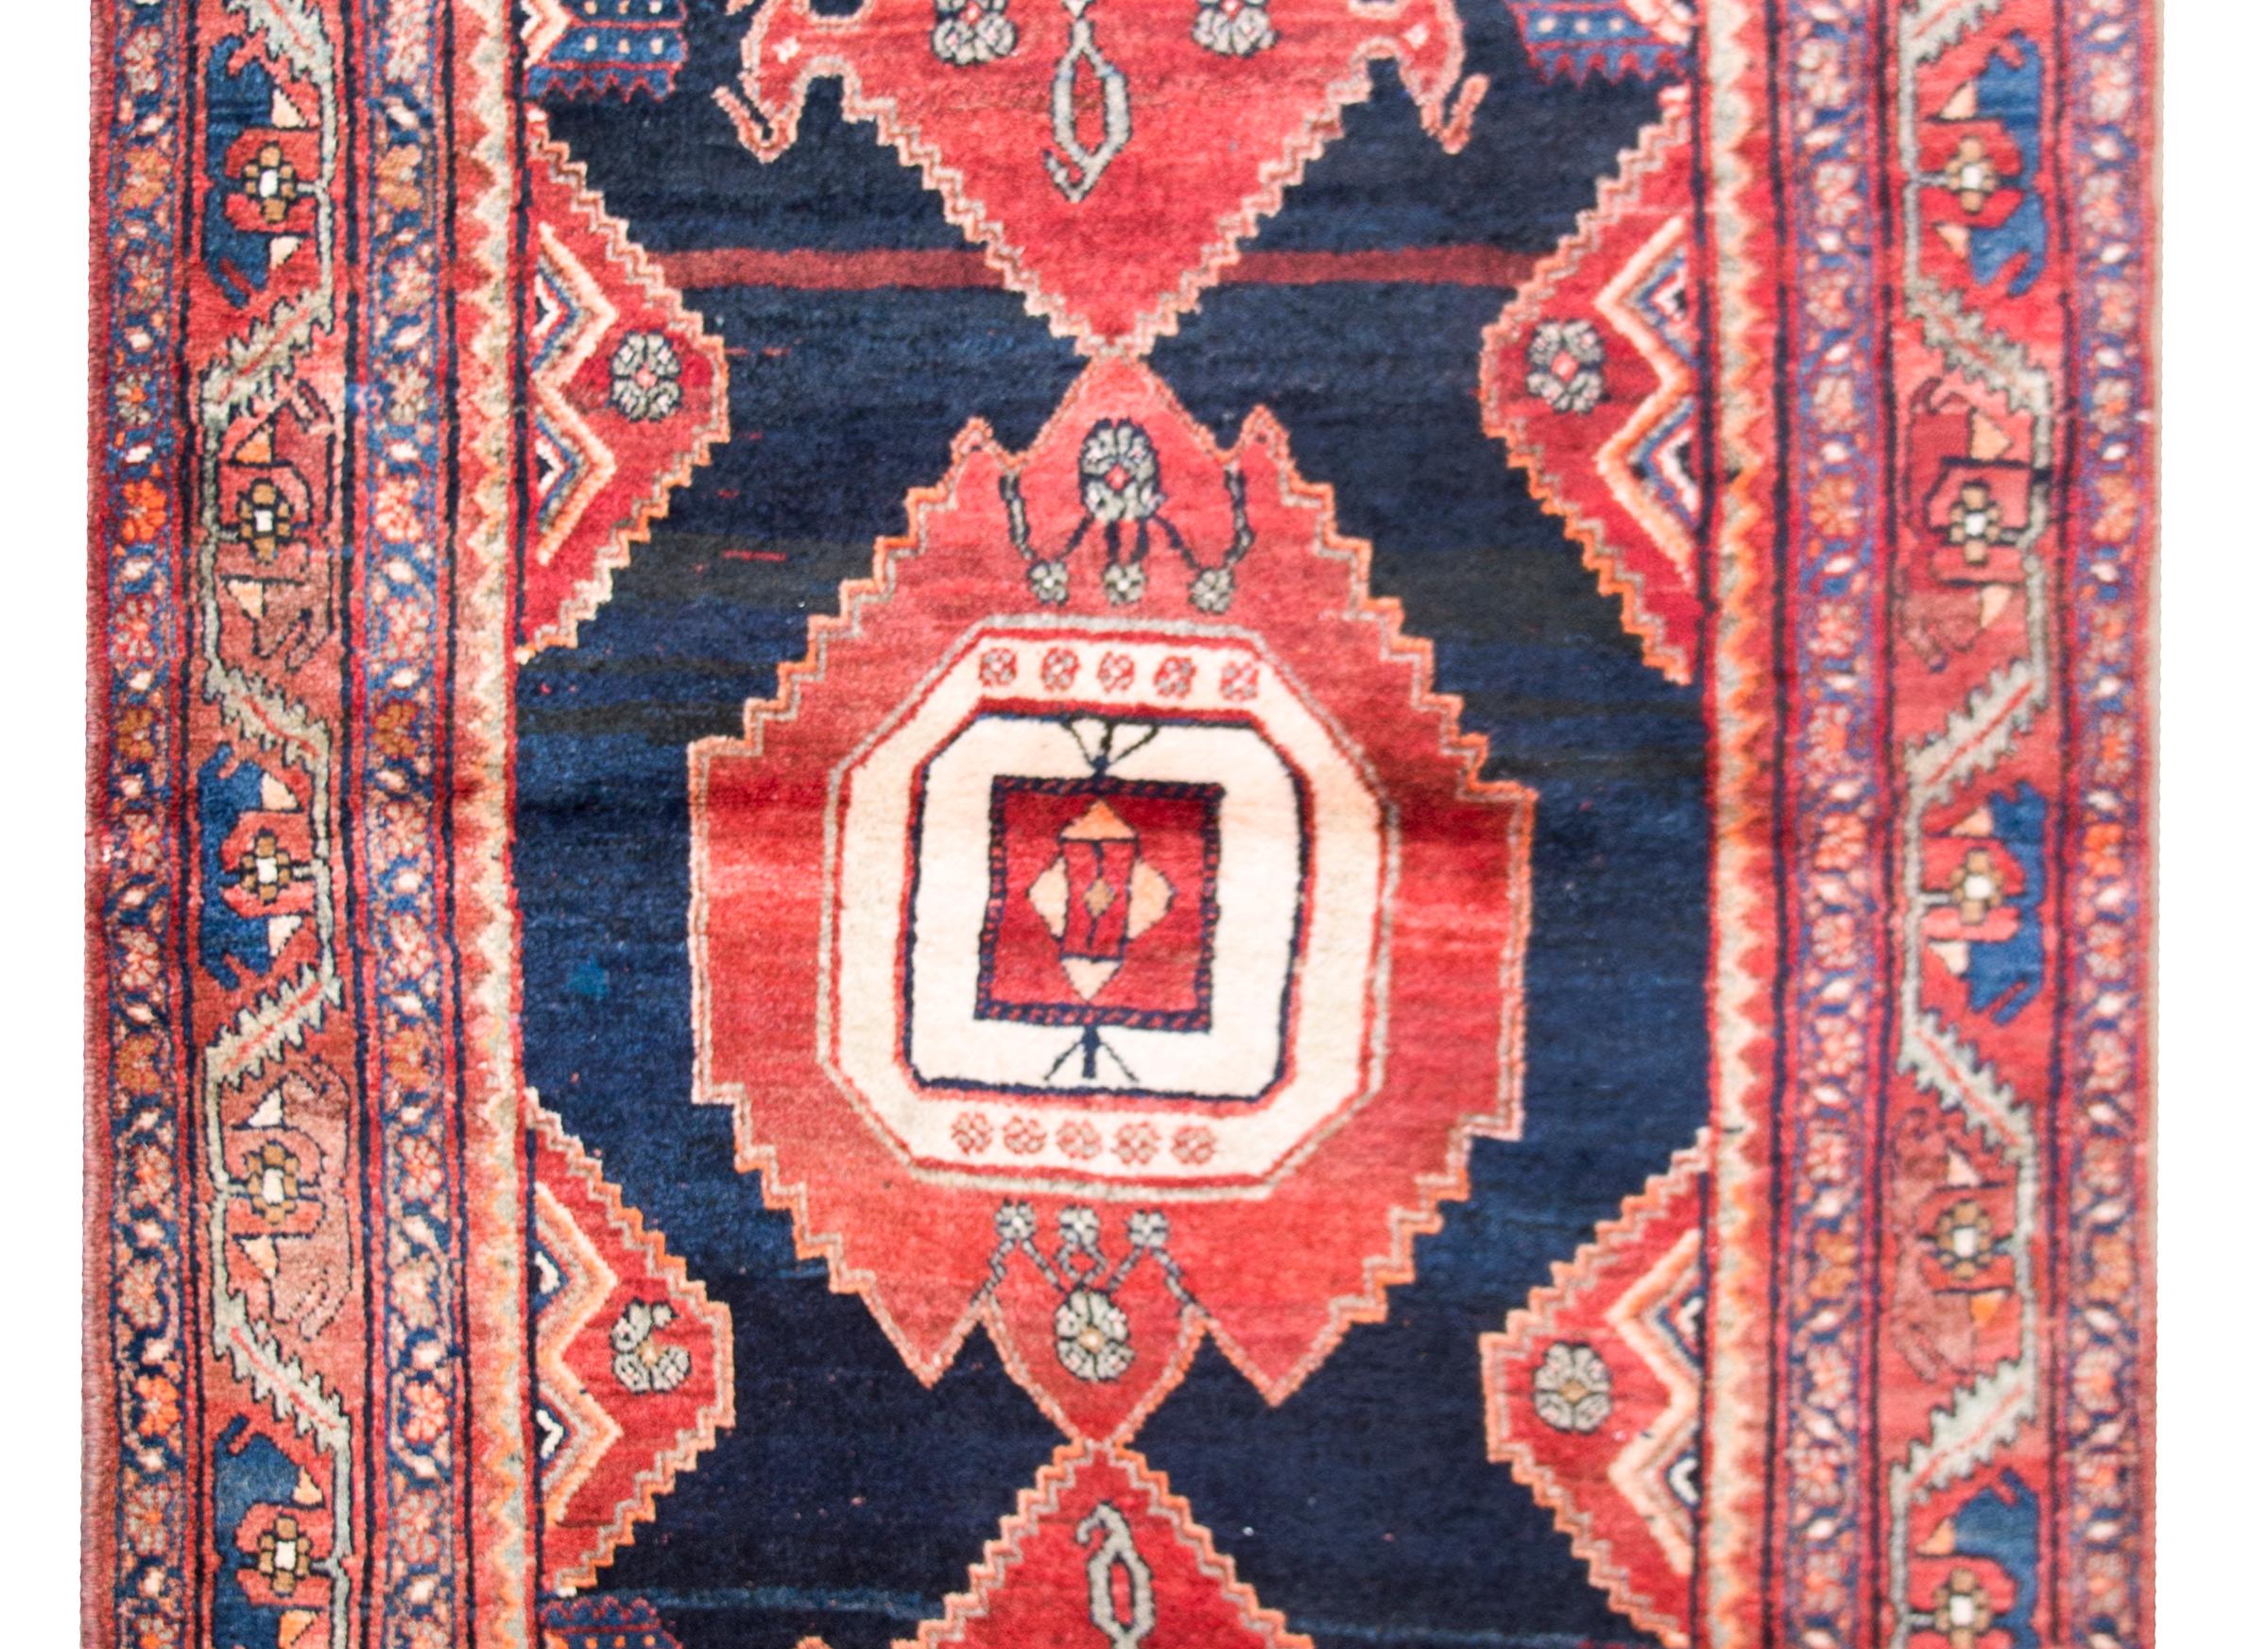 A wonderful early 20th century vintage Persian Mazleghan rug with bold geometric pattered medallions woven in crimson, white, orange, and gray, and set against an abrash indigo background, and surrounded by a border composed of multiple petite